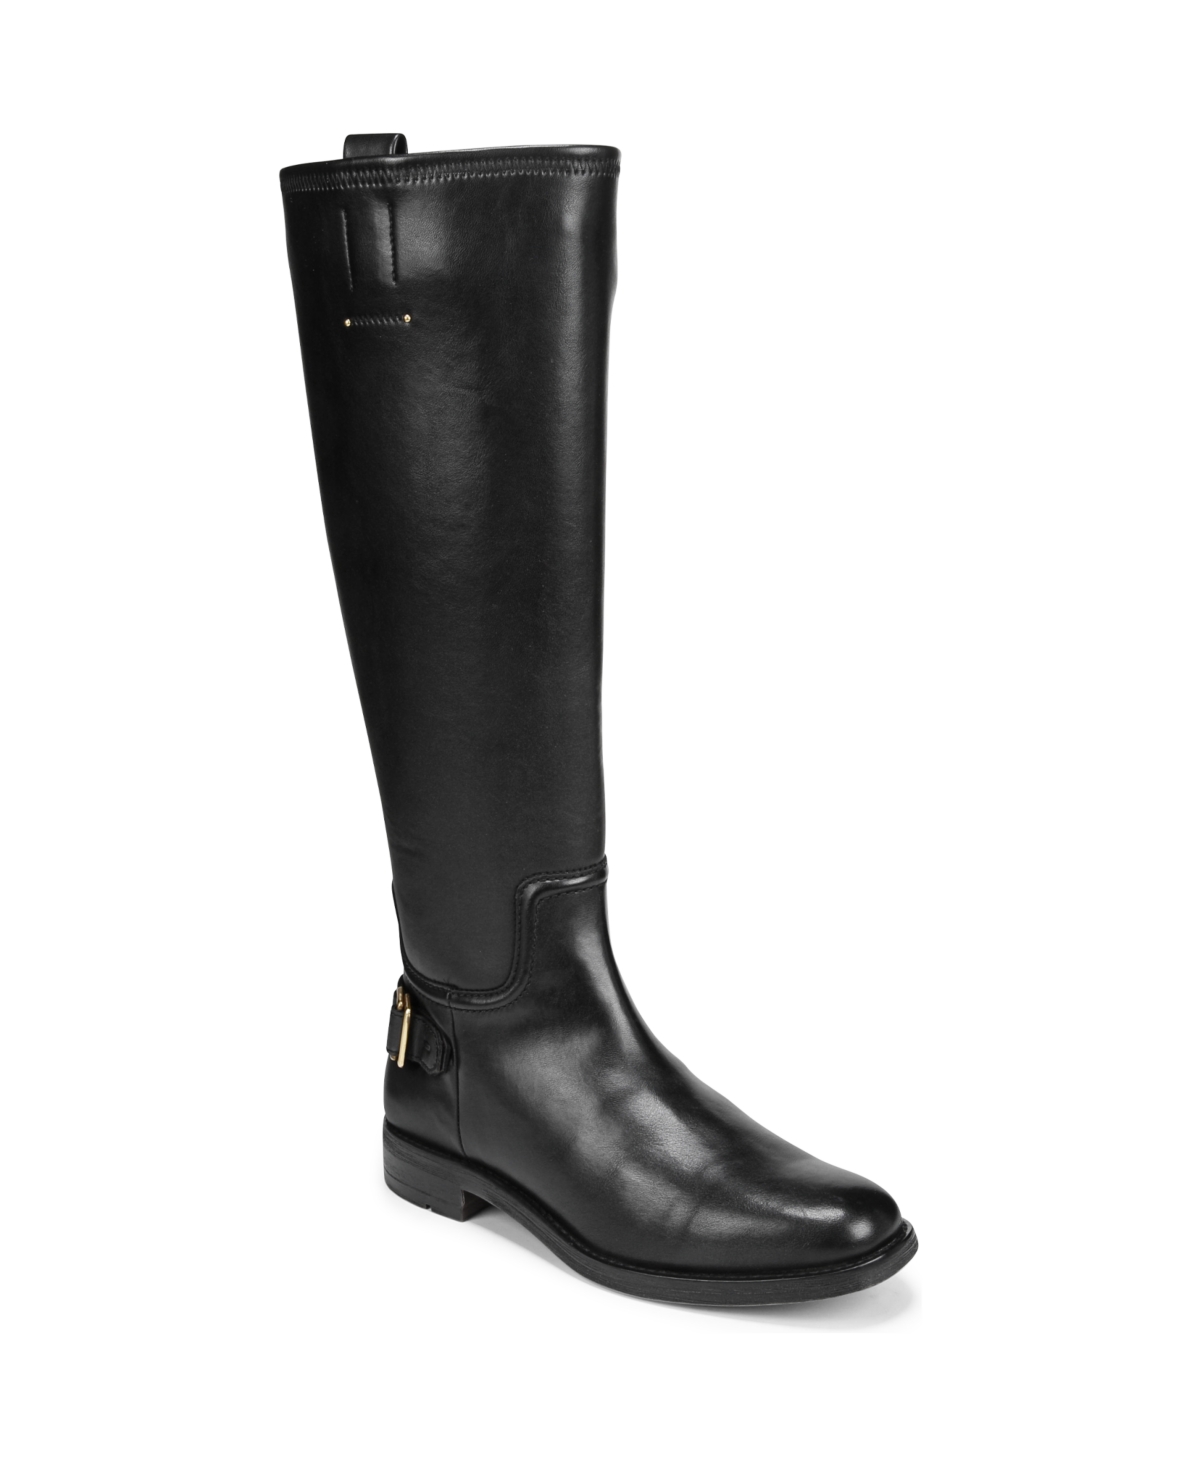 Merina Wide Calf Knee High Riding Boots - Black Faux Leather